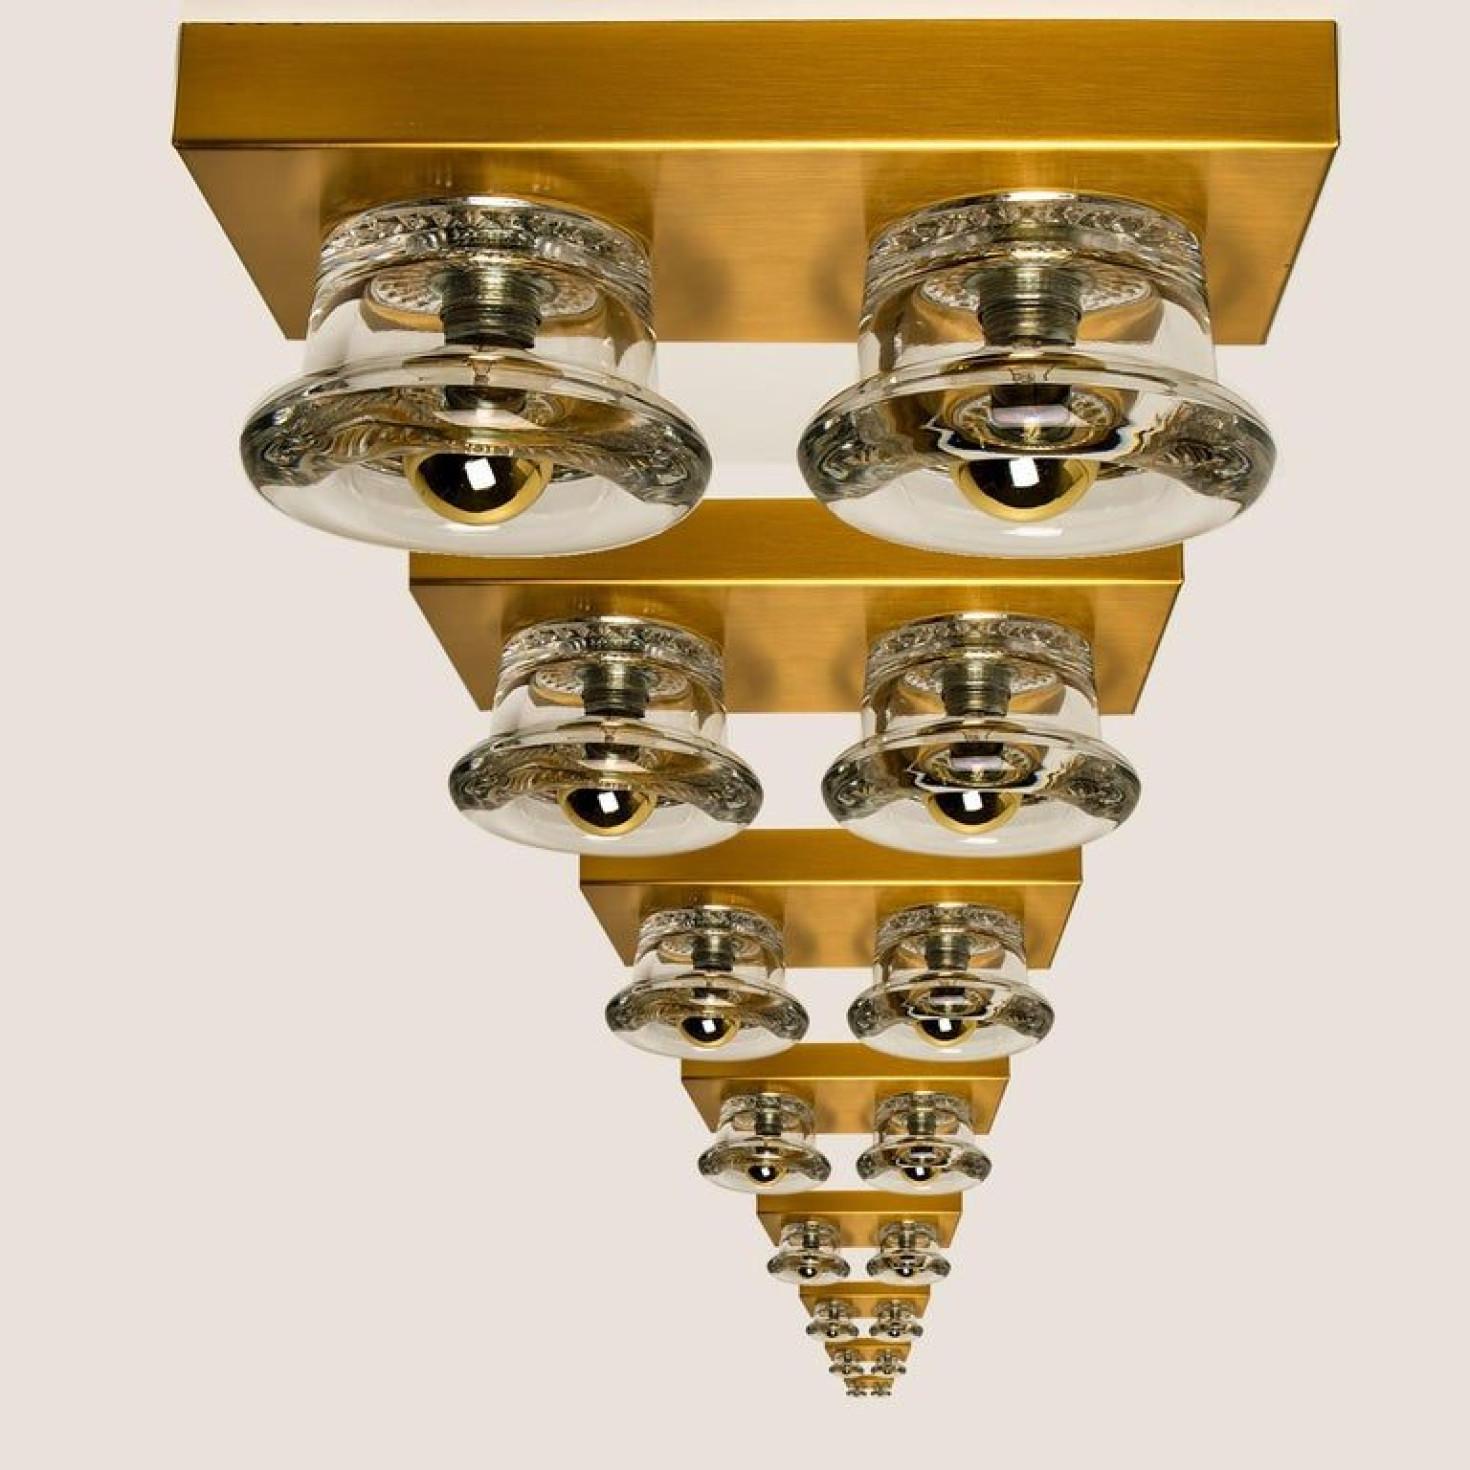 1 of the 8 original glass wall sconces or flush mounts Cosack lights, Germany, 1970s.

Original 1970s modernist wall light with four glass lighting elements. This light was designed and produced by Cosack Lights, one of the premium light producer